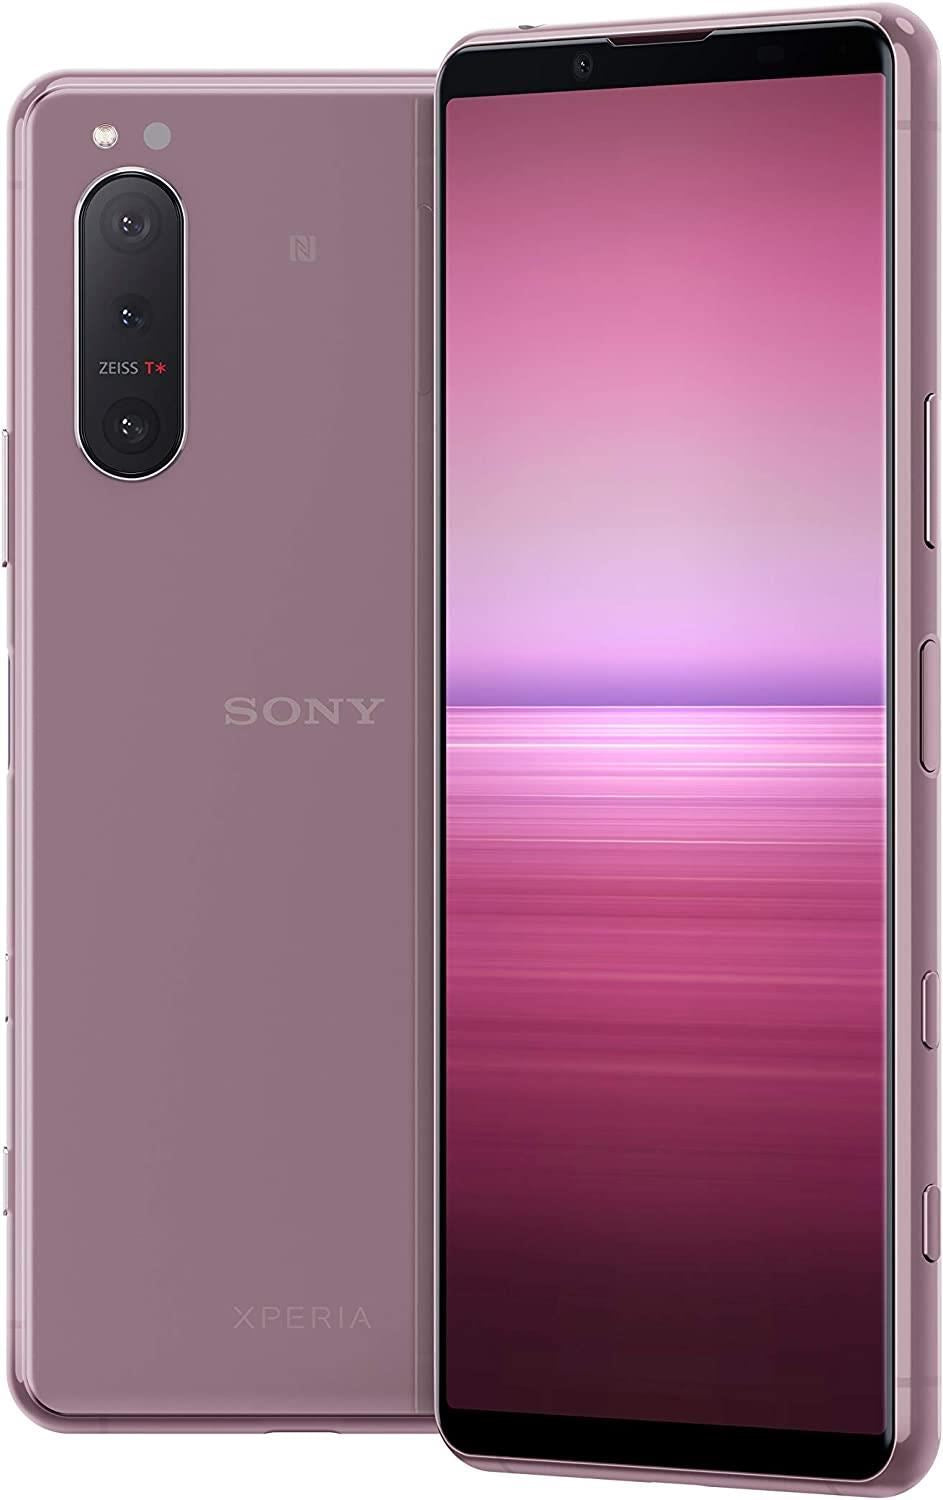 Sony Xperia 5 II 5G Smartphone Unlocked Android 128-256GB